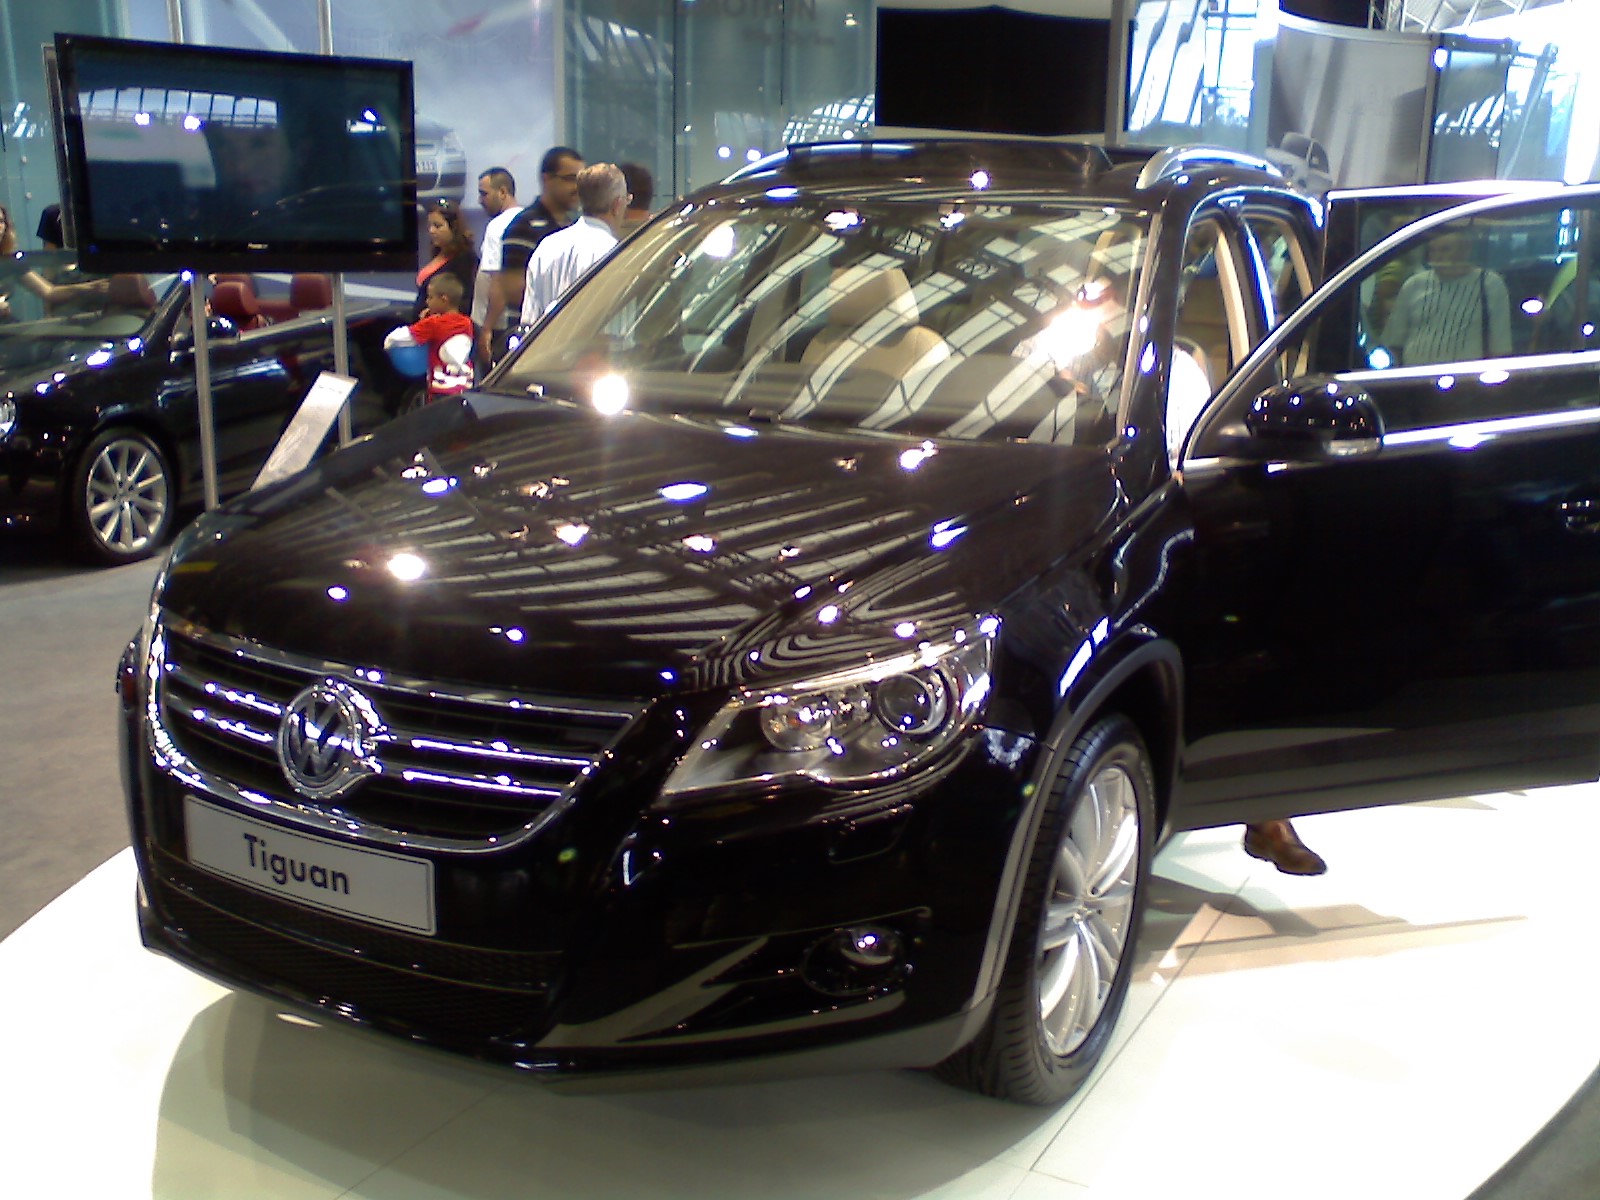 a black car with large hood sitting on display